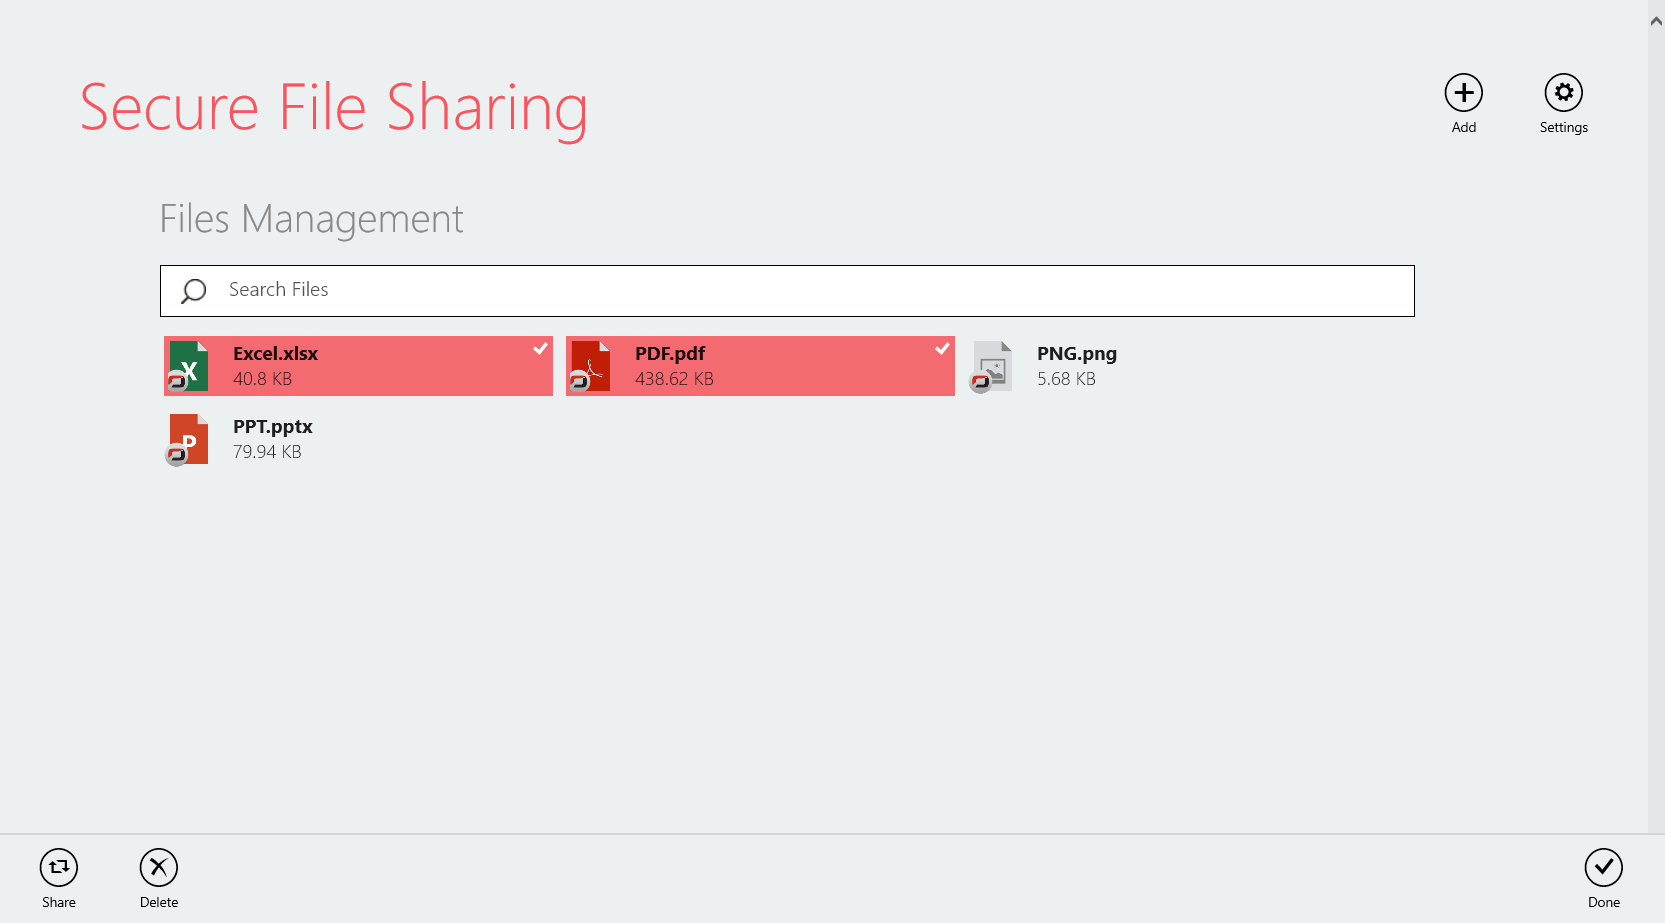 Secure File Sharing allows you to securely share files with other users